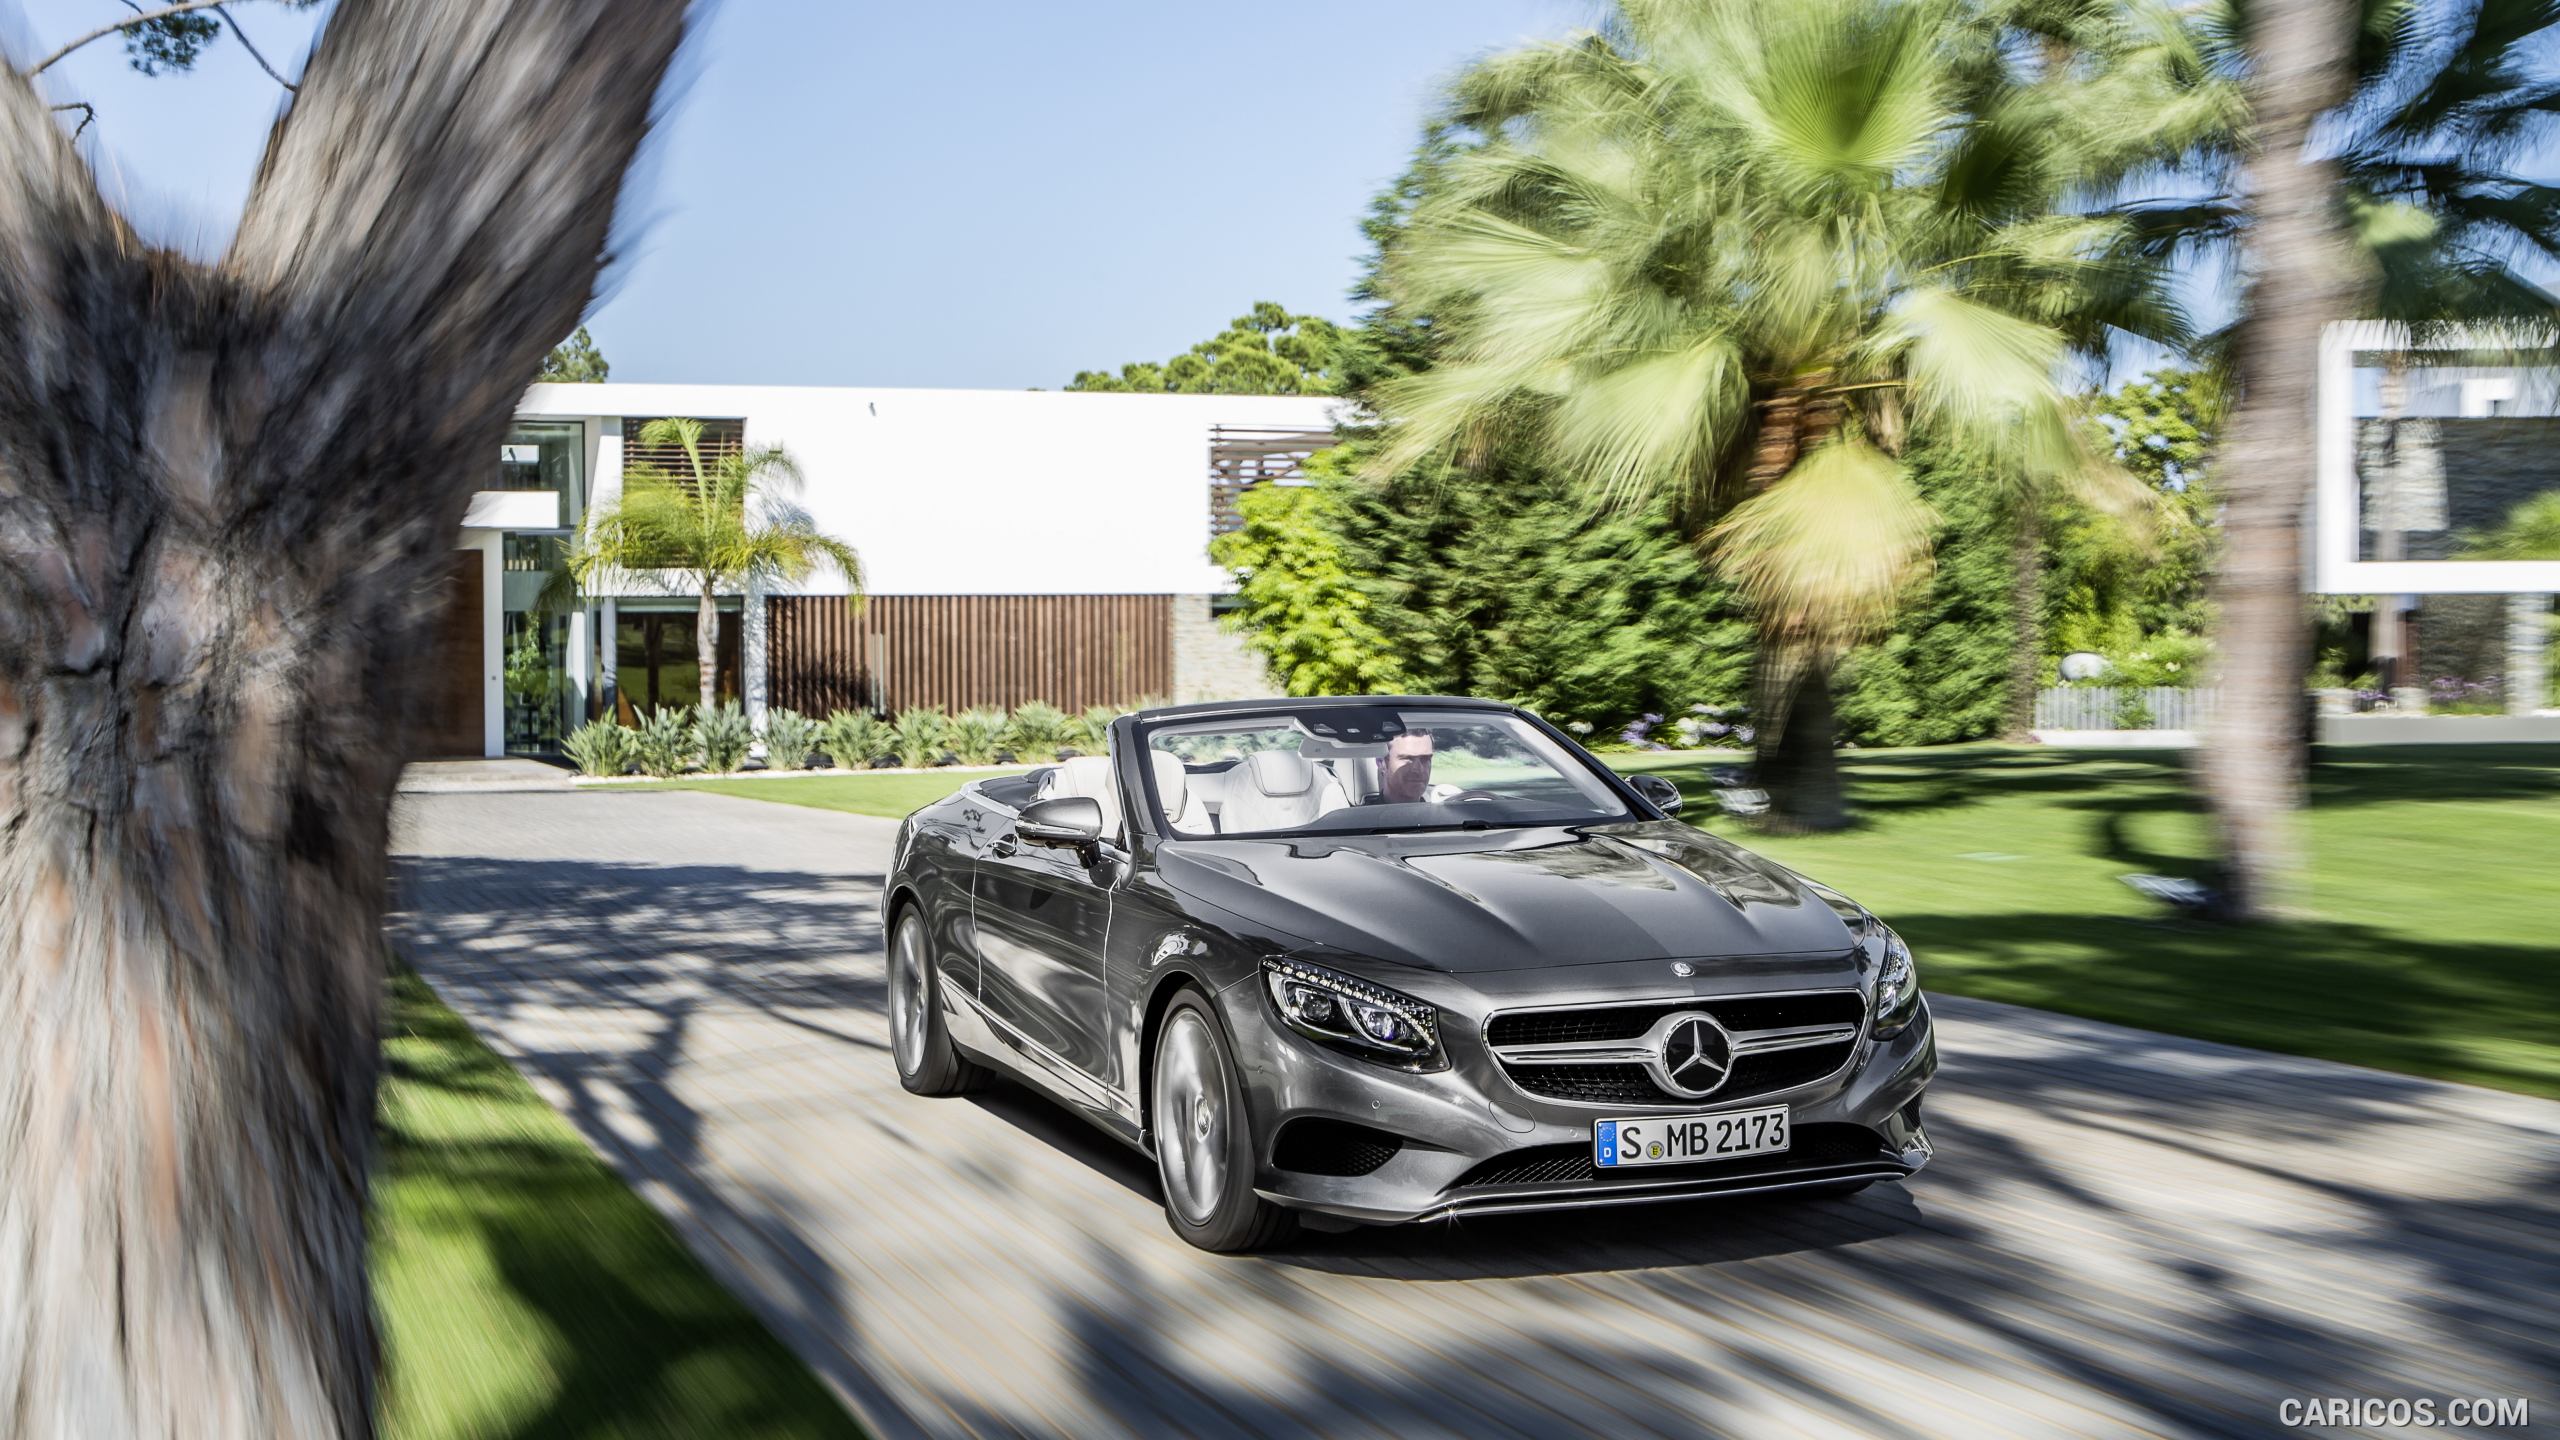 2017 Mercedes-Benz S-Class S500 Cabriolet (Selenit Grey) - Front, #2 of 56